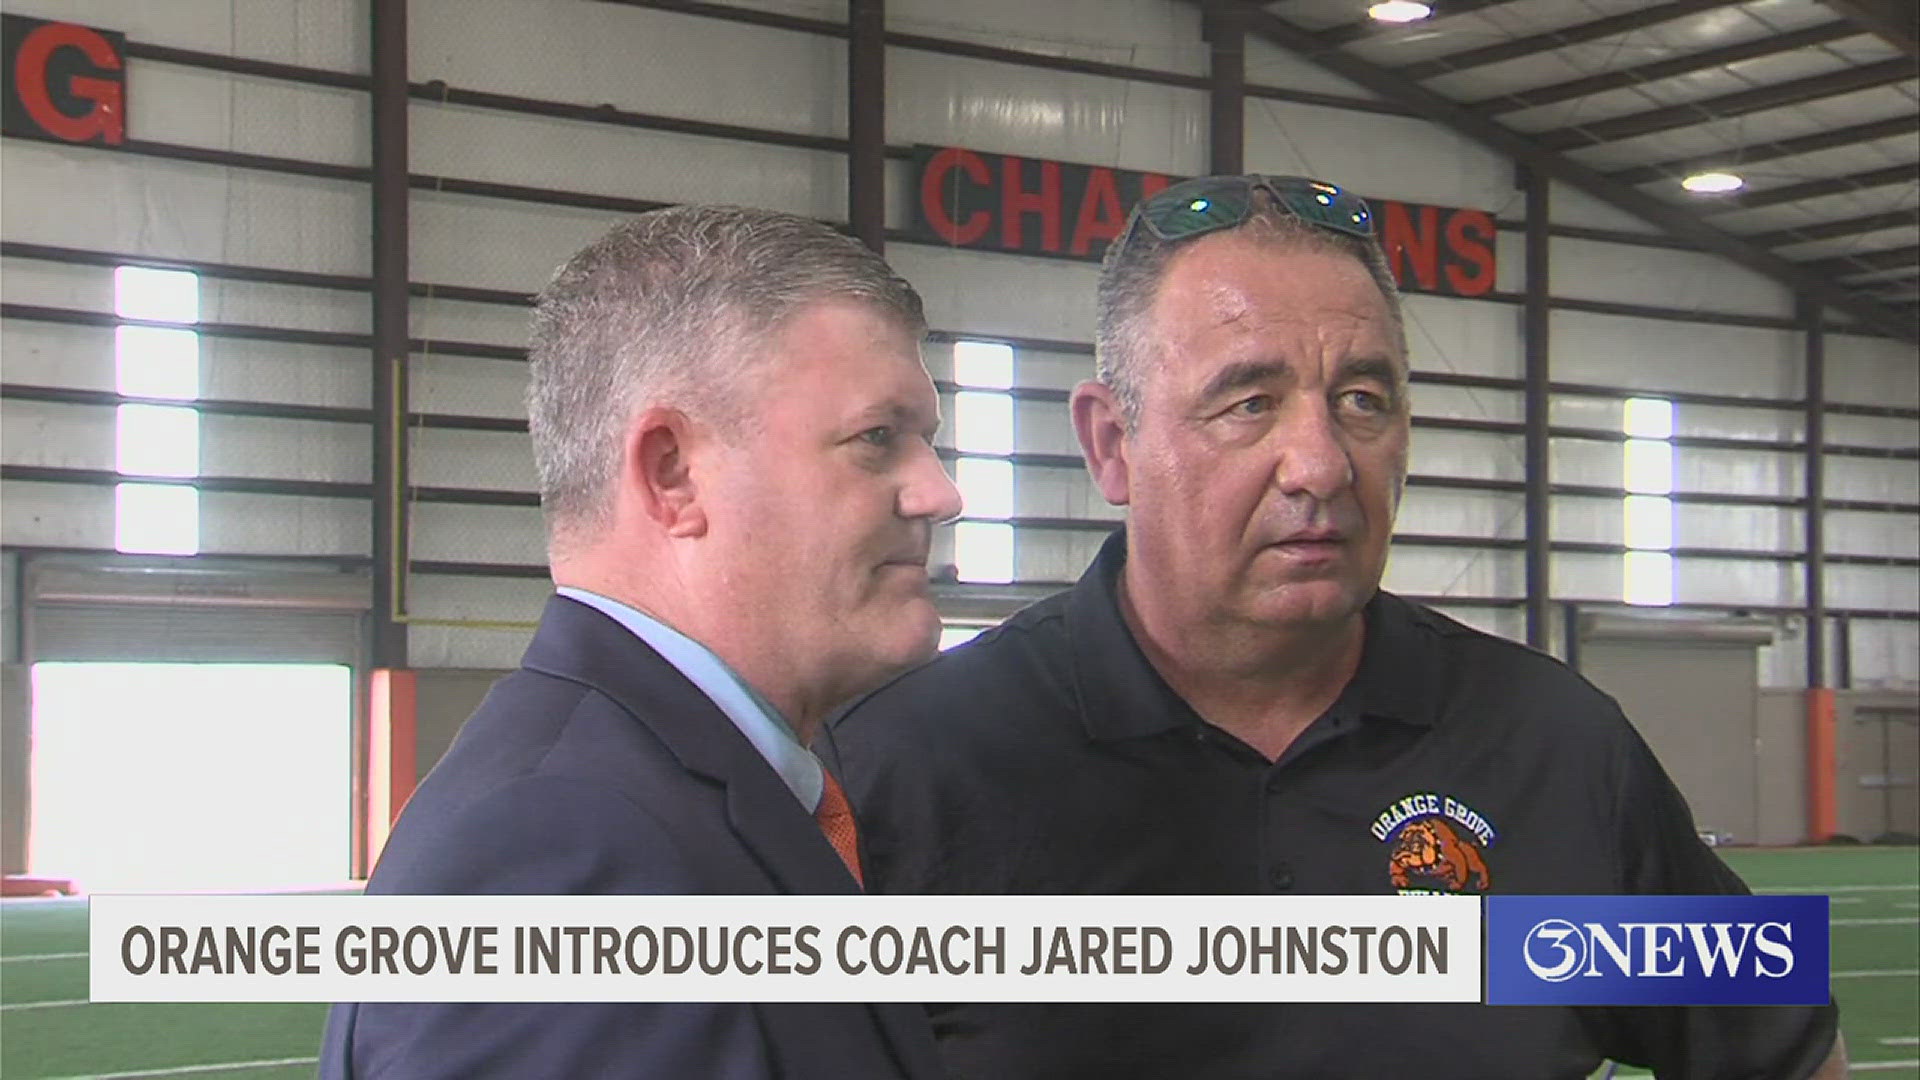 Johnston returns to his hometown after a successful stint at Schertz Clemens.